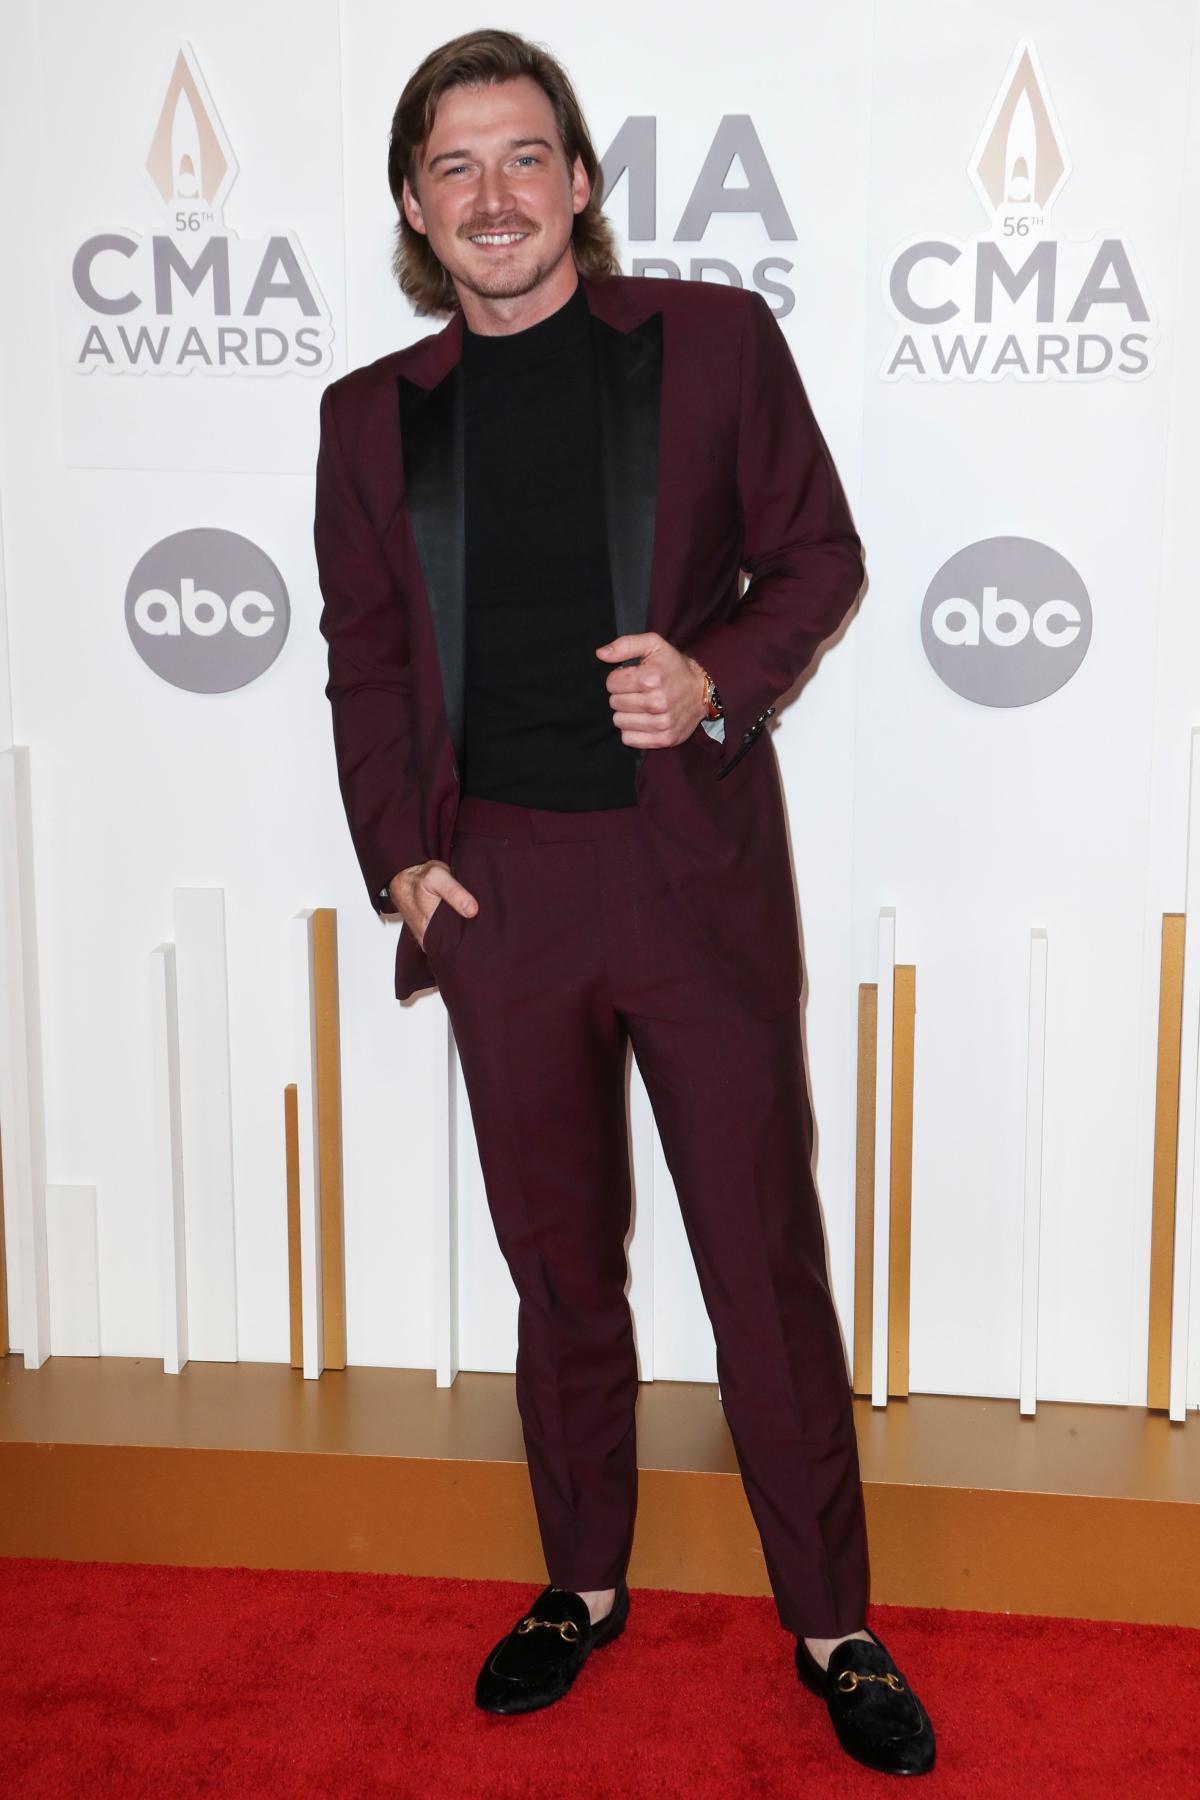 Wallen Hit the 2022 CMA Awards Red Carpet 1 Year After Being